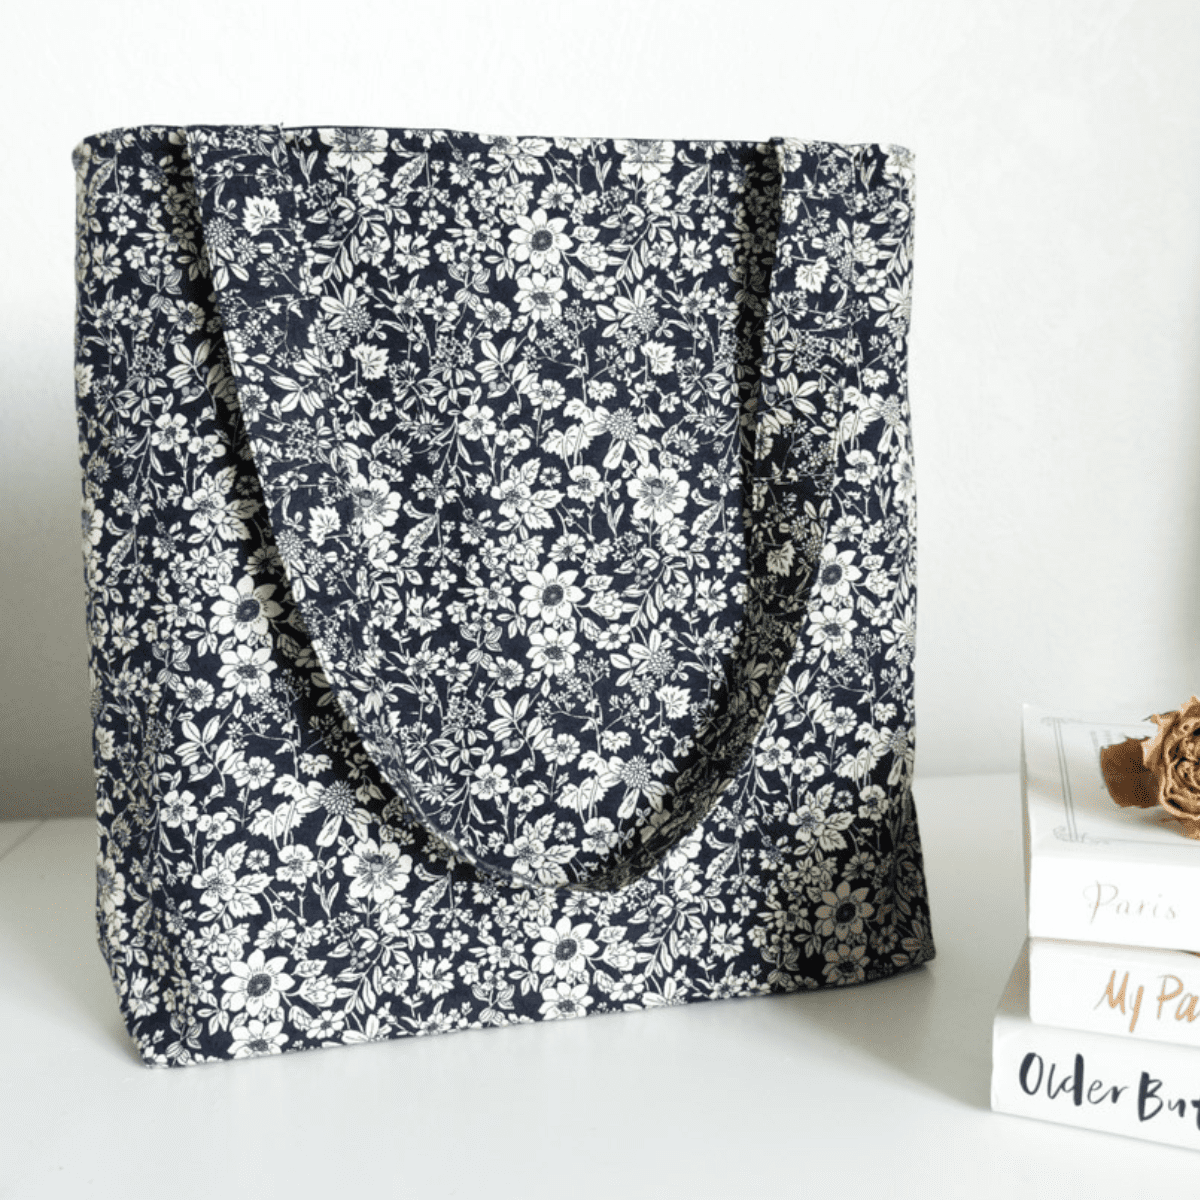 How to Make a Lined Tote Bag